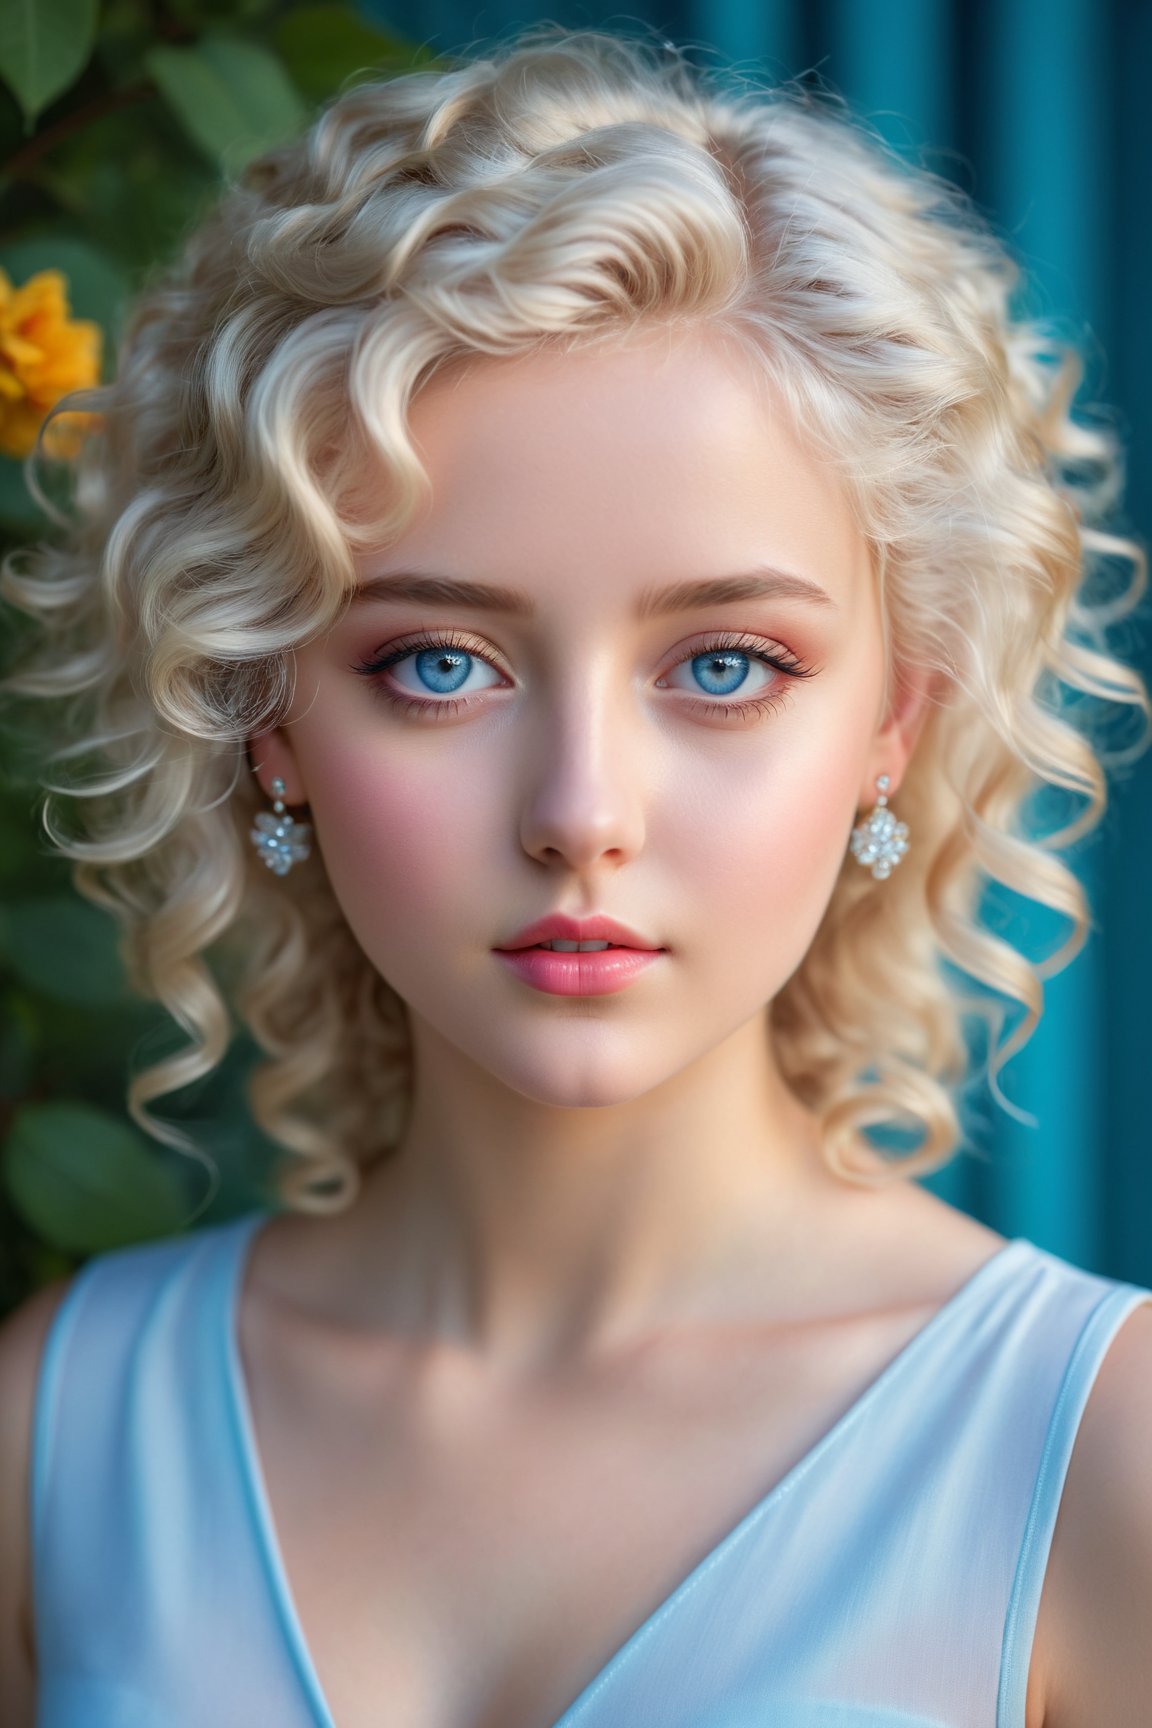 (best quality,4k,8k,highres,masterpiece:1.2),ultra-detailed,(realistic,photorealistic,photo-realistic:1.37),white curly hair,blue eyes,small nose and plump lips,girly 18 year old boy,girly outfit,soft and delicate facial features,smooth skin,pensive expression,faint blush on cheeks,fashionable accessories,beautifully styled hair,sparkling eyes,soft lighting,vibrant colors,modern art style,whimsical and dreamy atmosphere,artistic portrait,image resolution: 4096x4096

